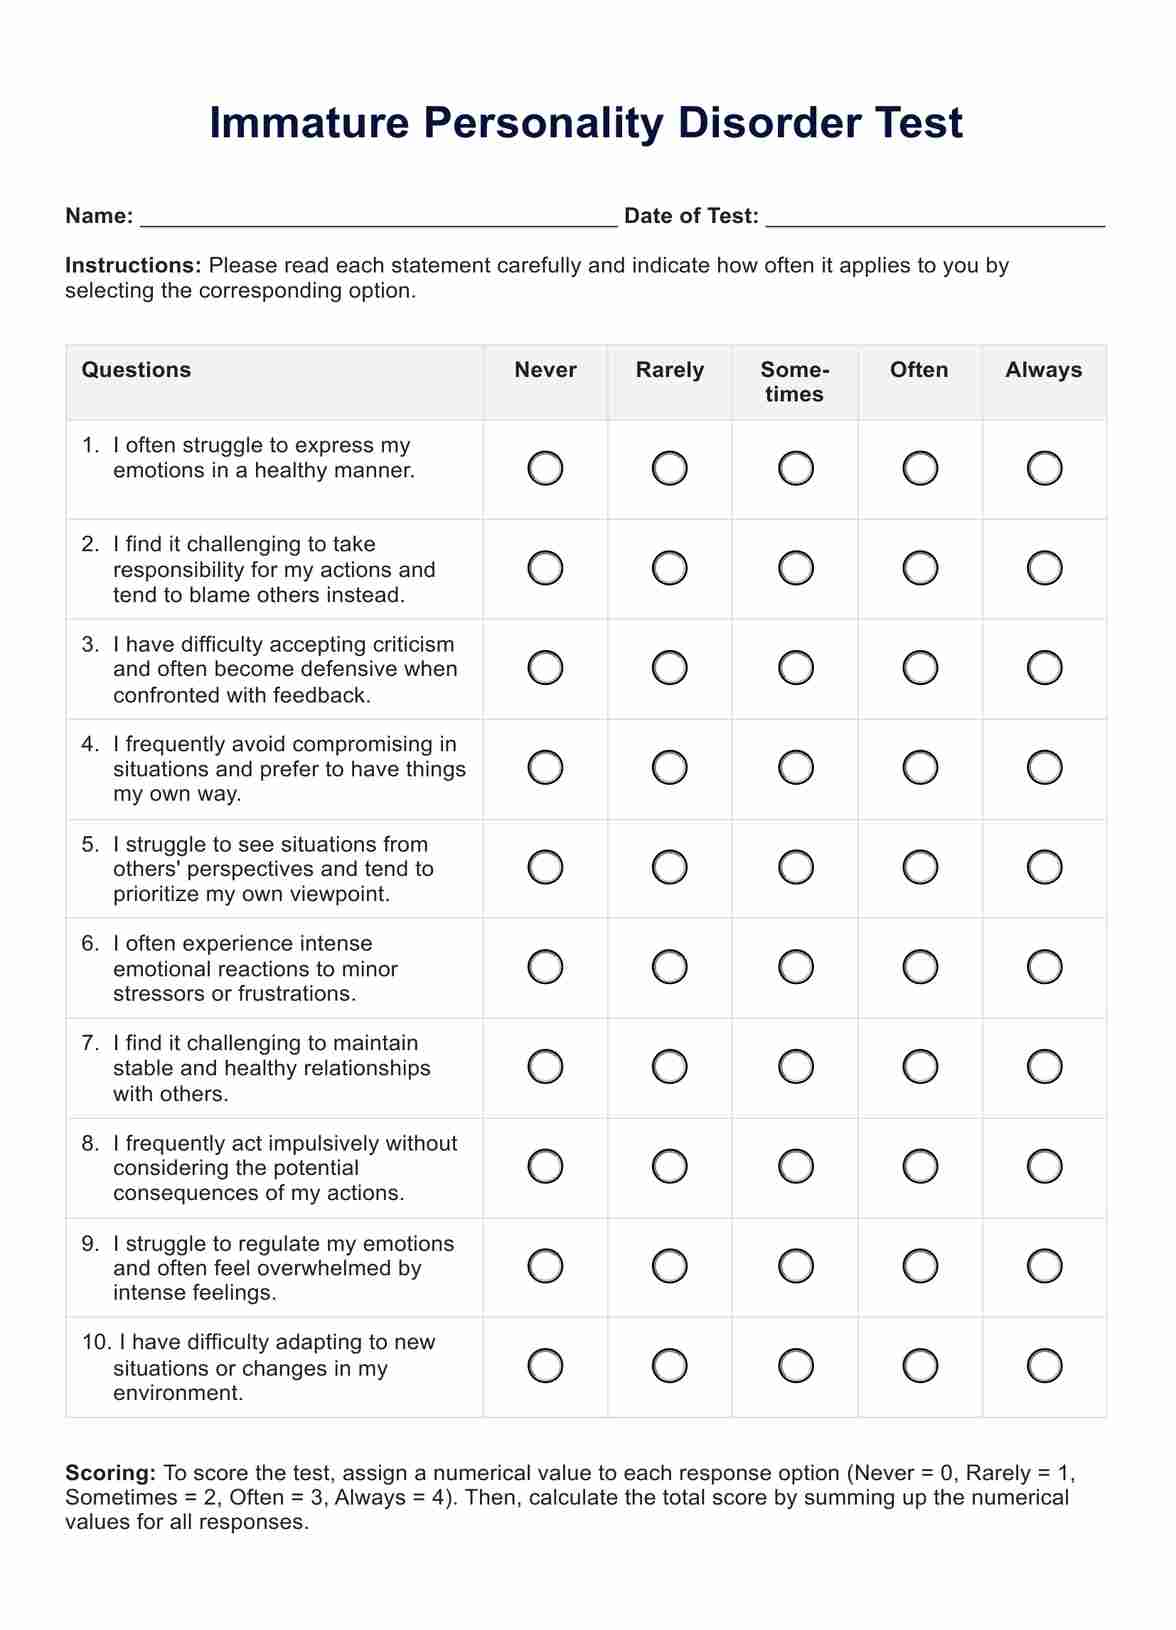 Immature Personality Disorder Test PDF Example